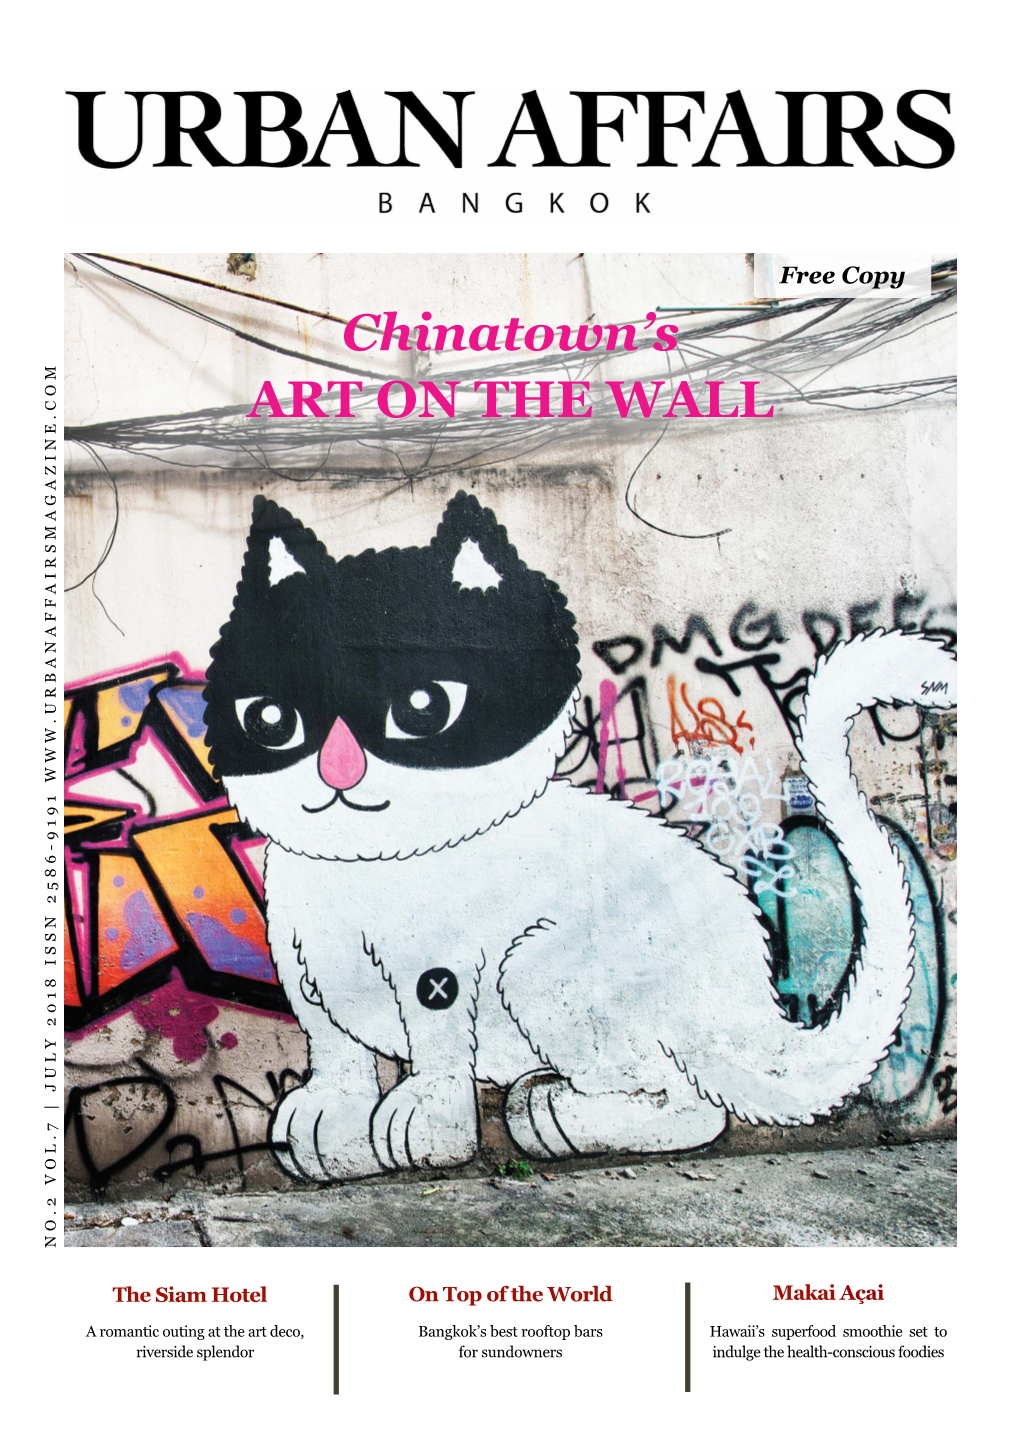 Chinatown's ART on the WALL